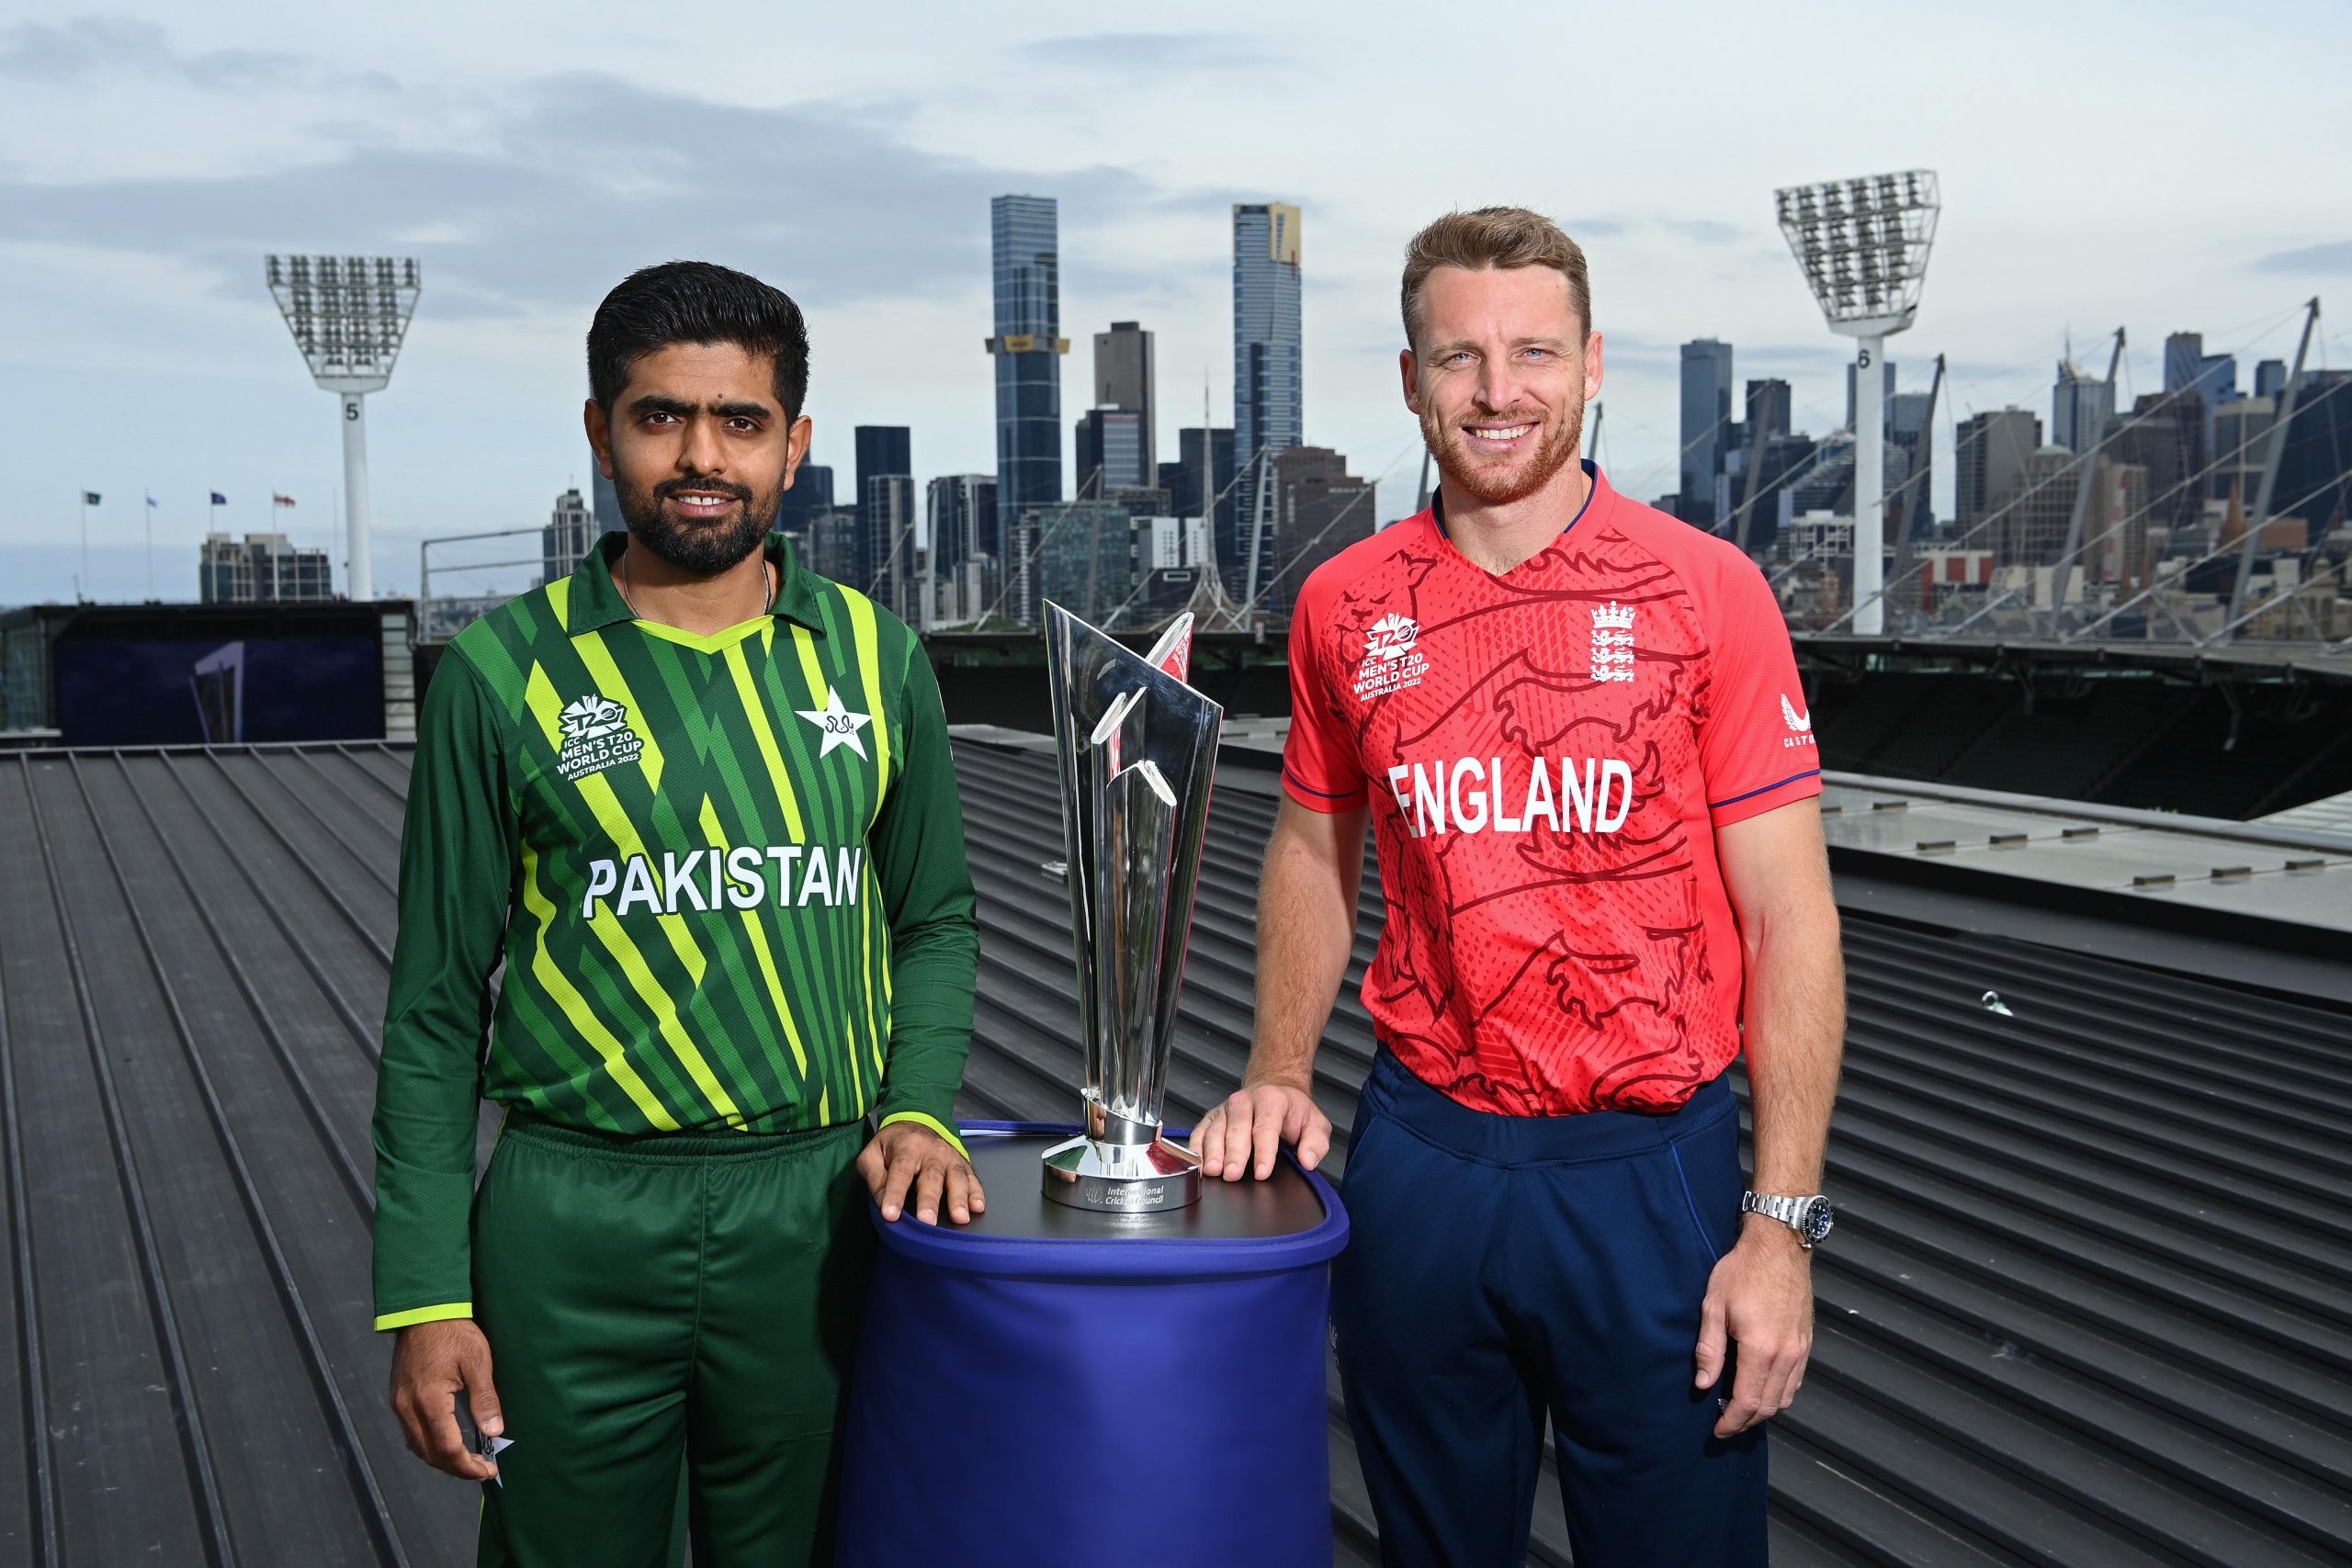 T20 World Cup 2022: Jos Buttler’s England to face off Babar Azam’s Pakistan in final